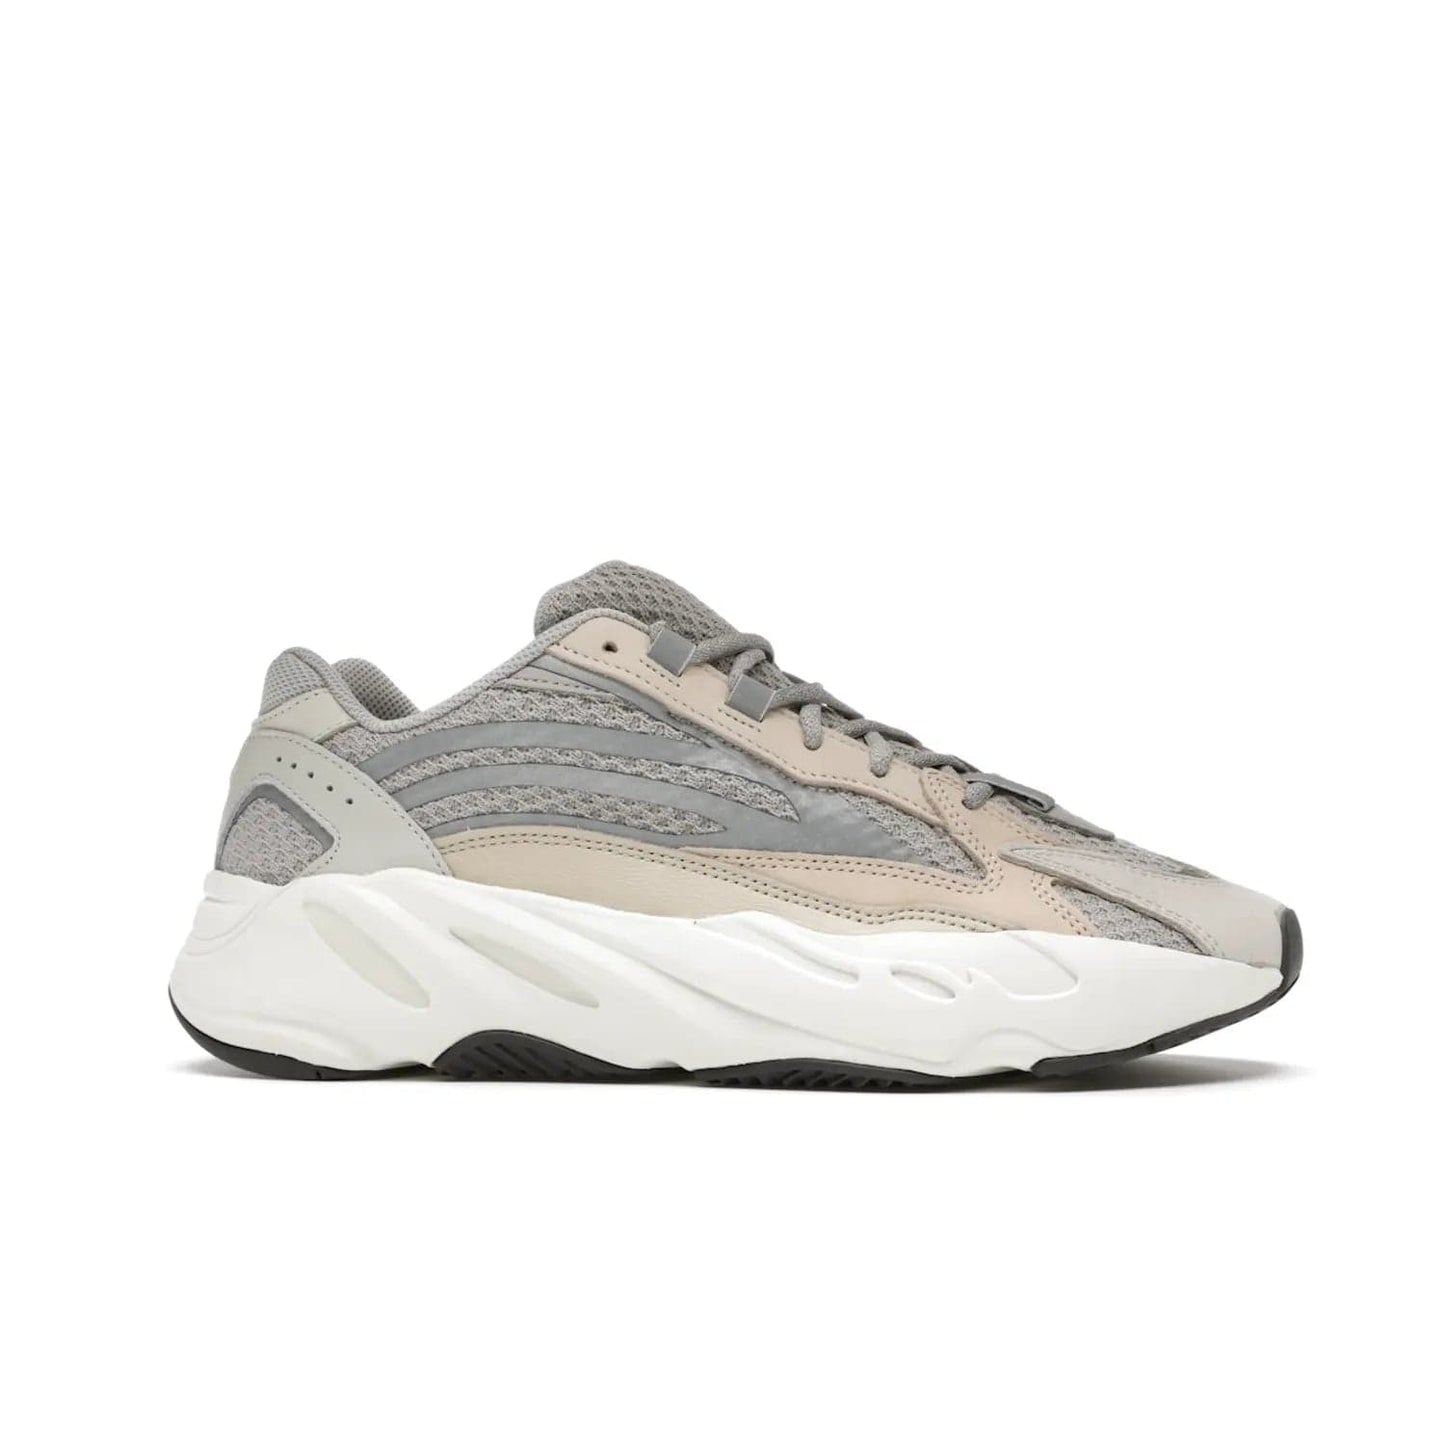 adidas Yeezy Boost 700 V2 Cream - Image 2 - Only at www.BallersClubKickz.com - Add style and luxury to your wardrobe with the adidas Yeezy 700 V2 Cream. Featuring a unique reflective upper, leather overlays, mesh underlays and the signature BOOST midsole, this silhouette is perfect for any stylish wardrobe.